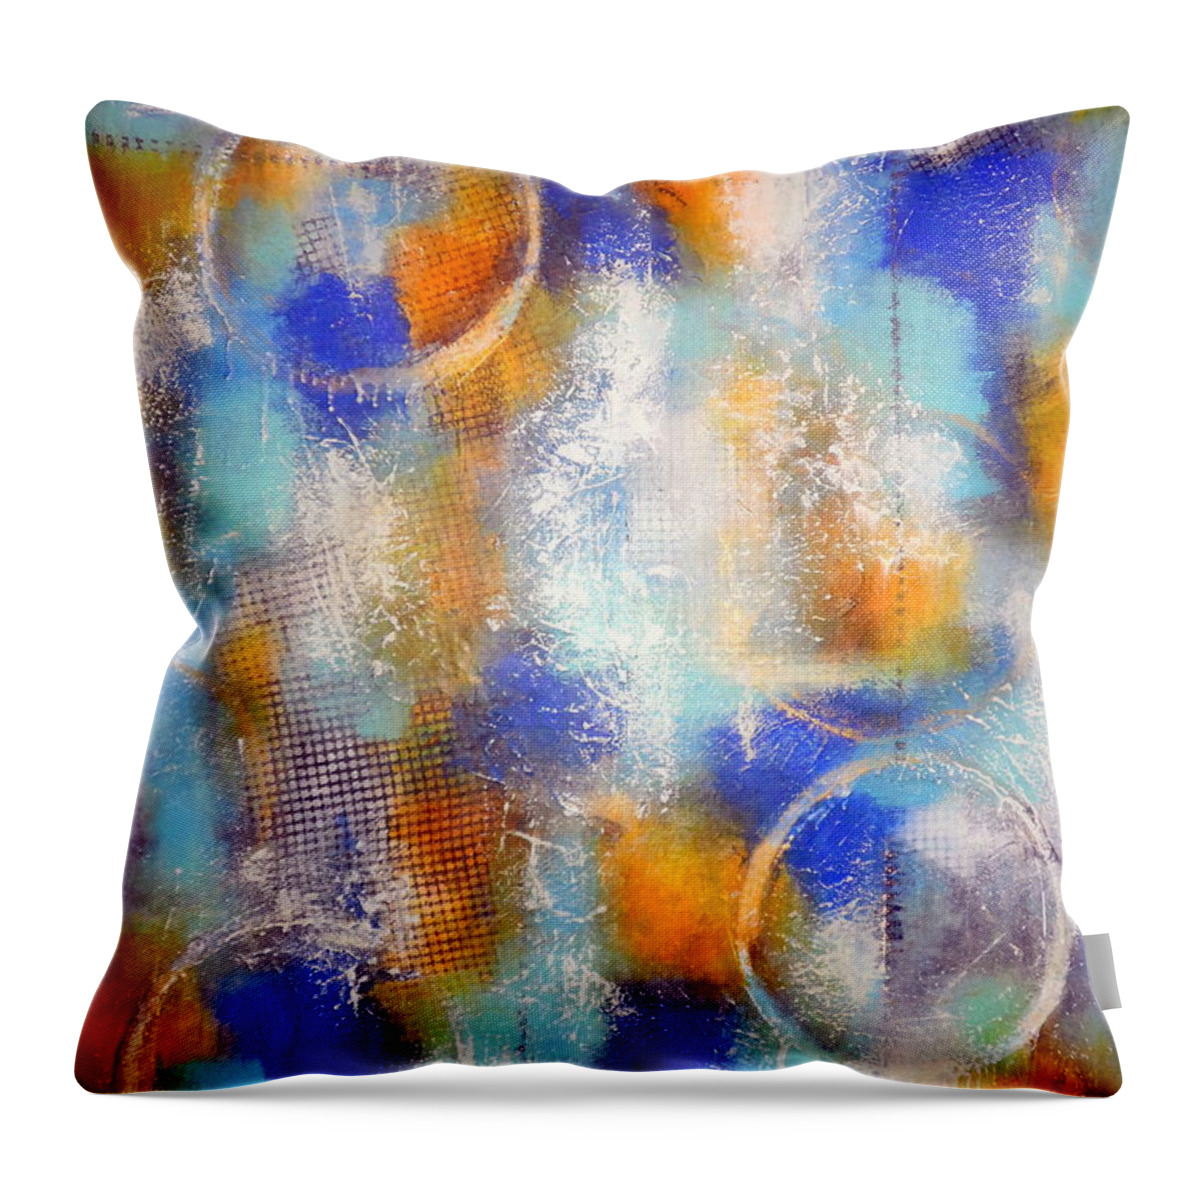 Resin Art Throw Pillow featuring the painting Into the Mystic by Jane Biven